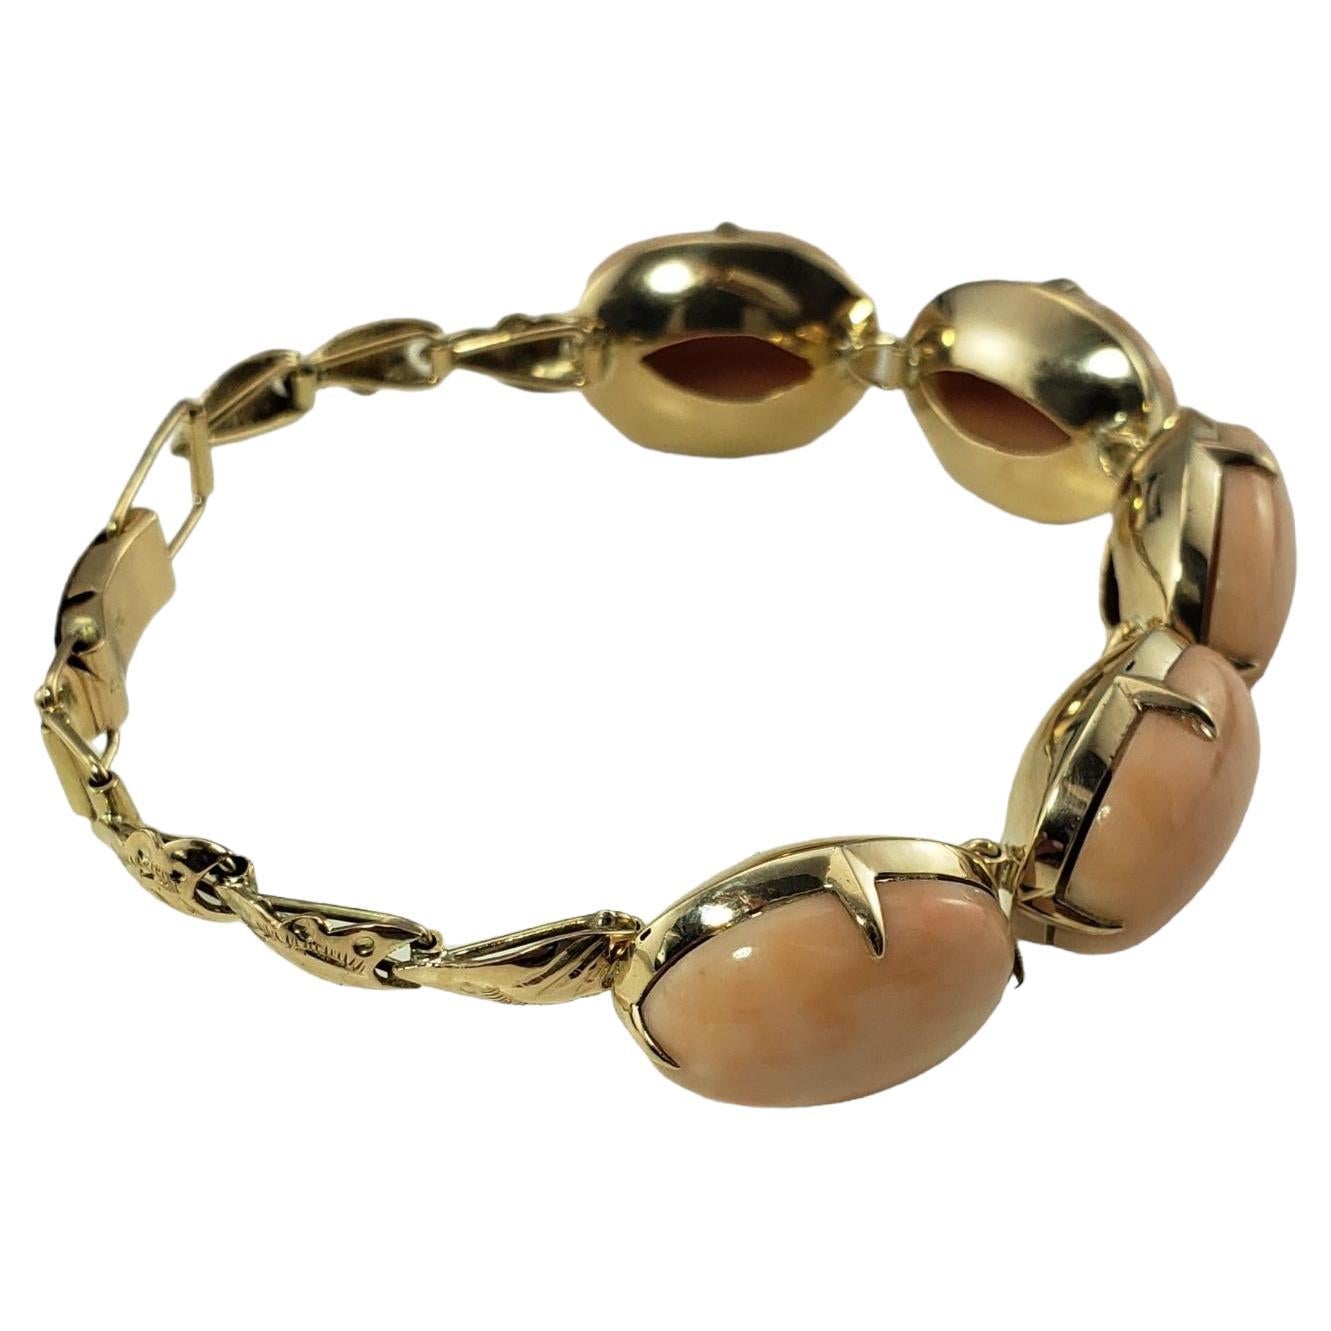 Vintage 14 Karat Yellow Gold and Coral Bracelet-

This lovely handmade bracelet features five coral stones (19 mm x 14 mm) set in classic 14K yellow gold.  

Size:  6.5 inches (adjustable)

Weight: 20.8 gr./ 13.3 dwt.

Stamped: 14K

Very good